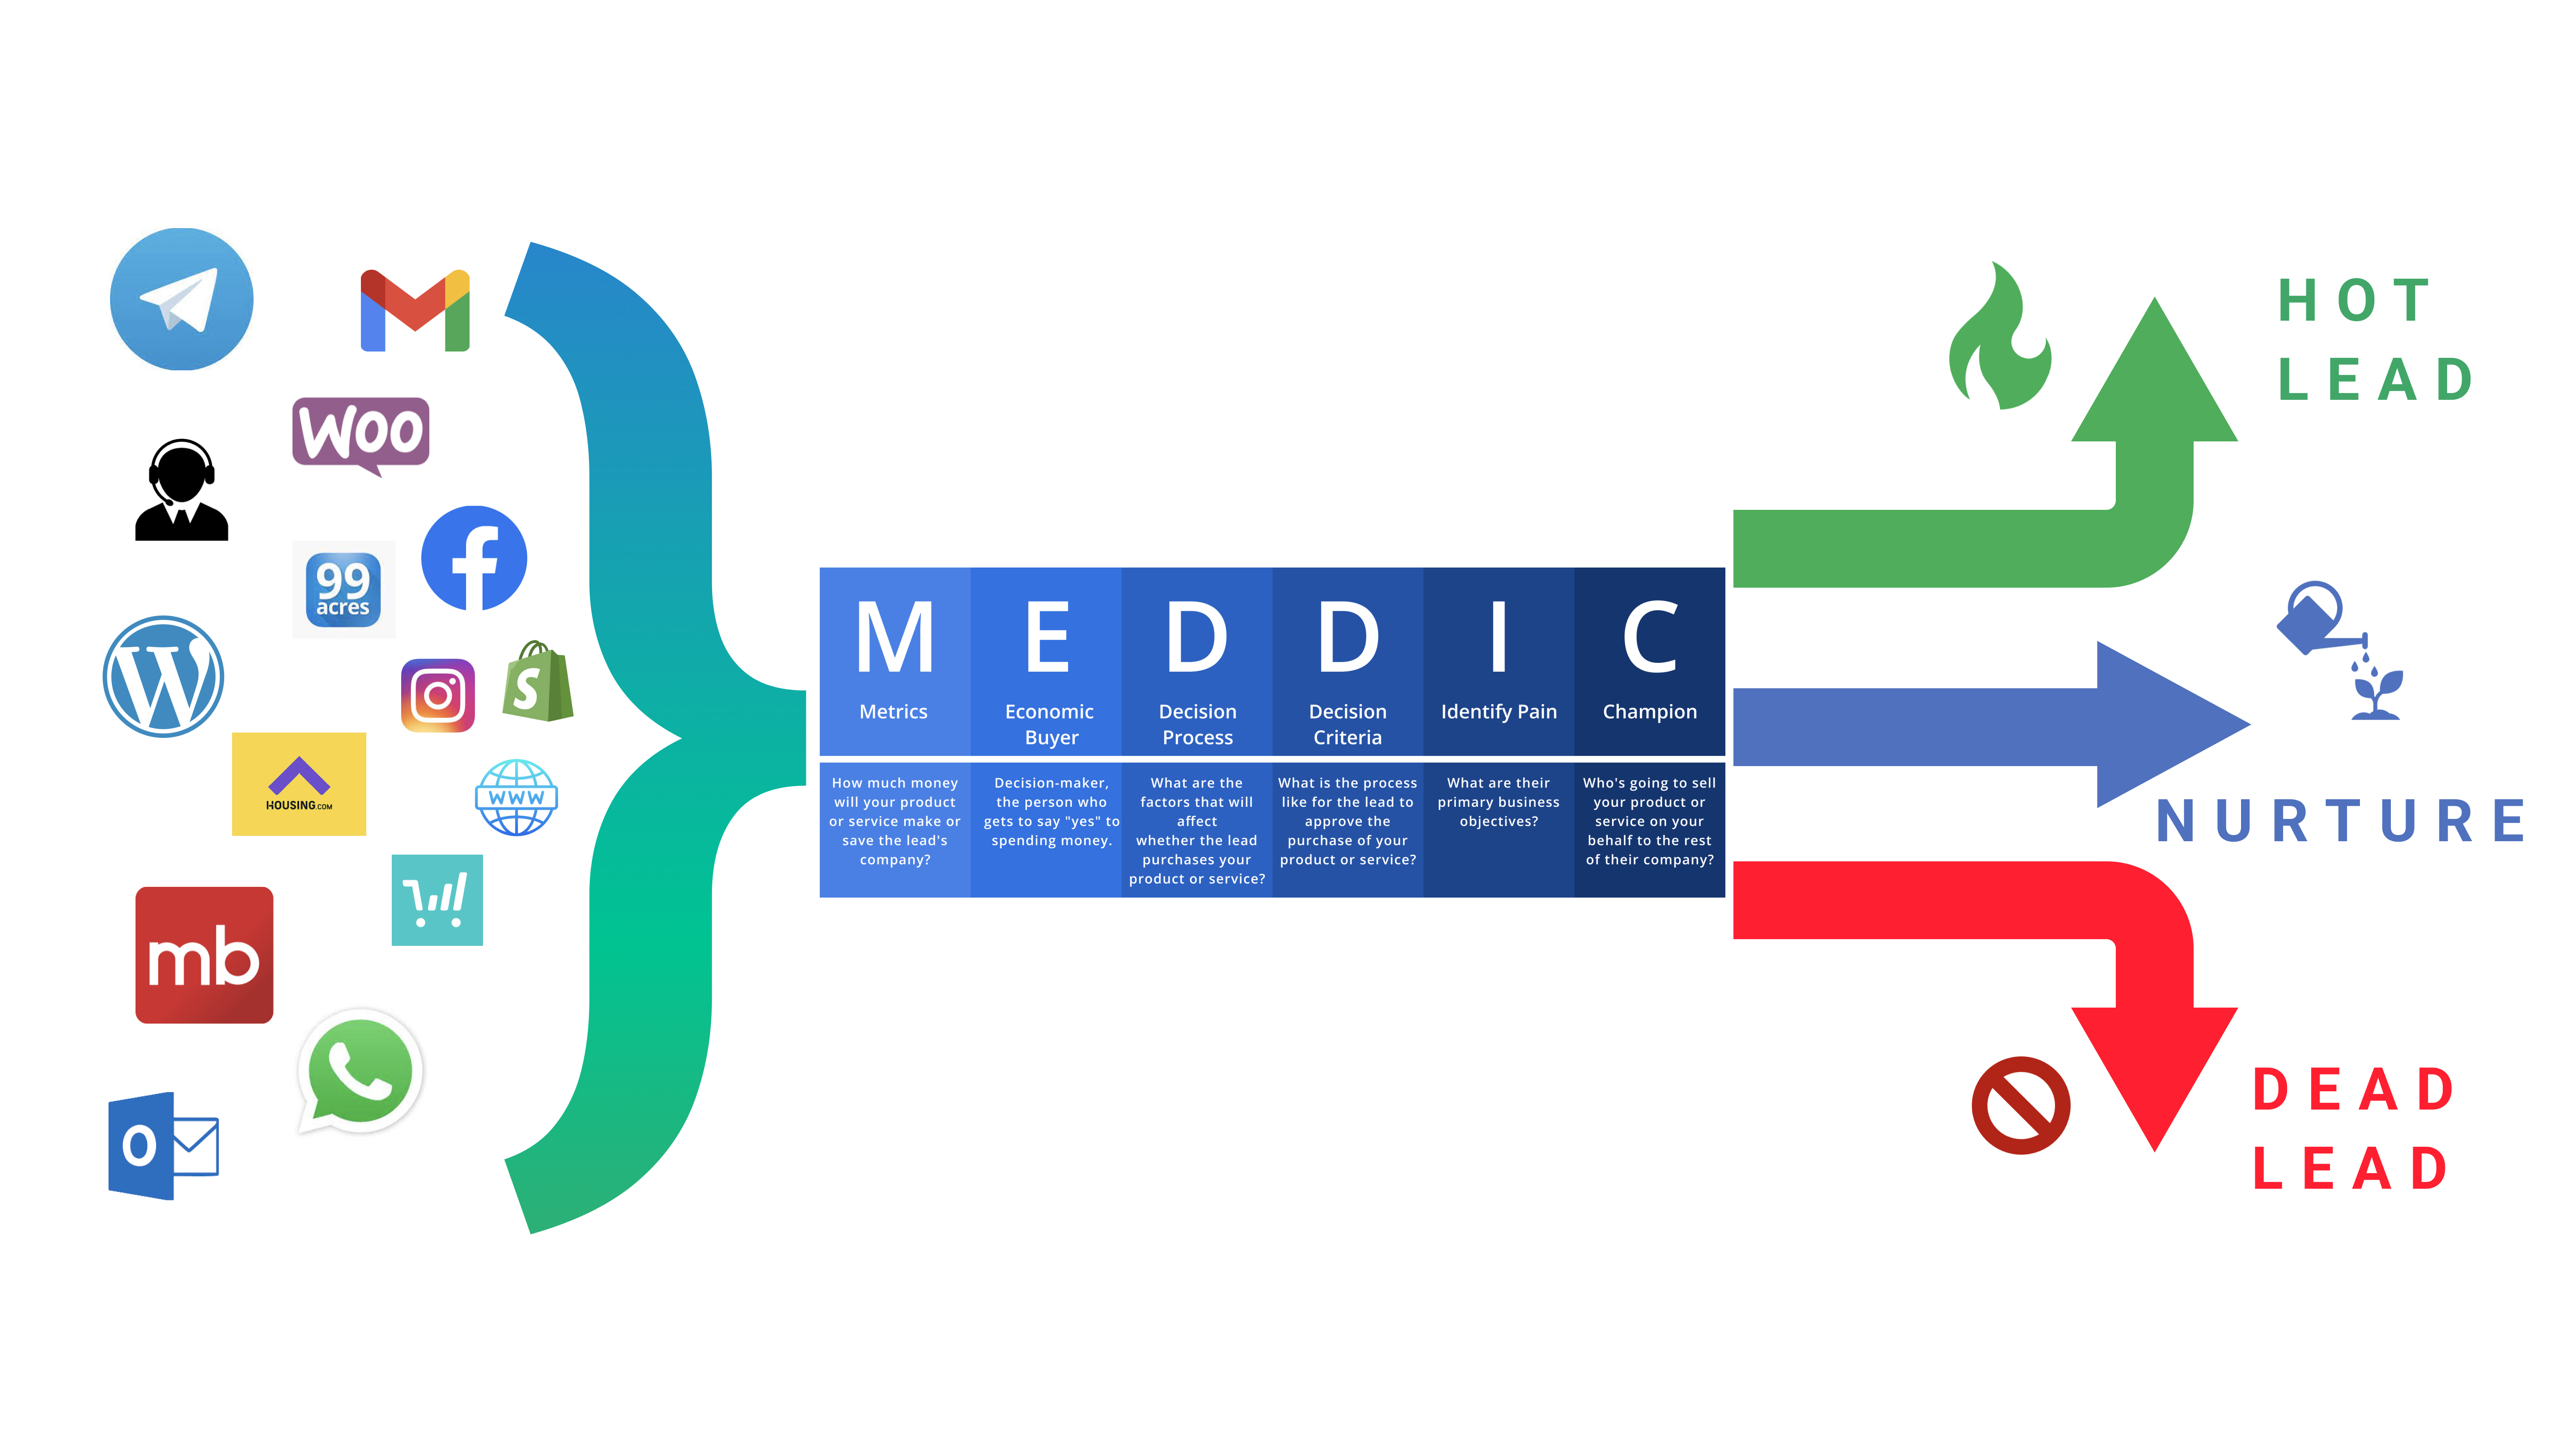 MEDDIC Framework to qualify leads- Fit, Authority, Interest, Need, Timeline.